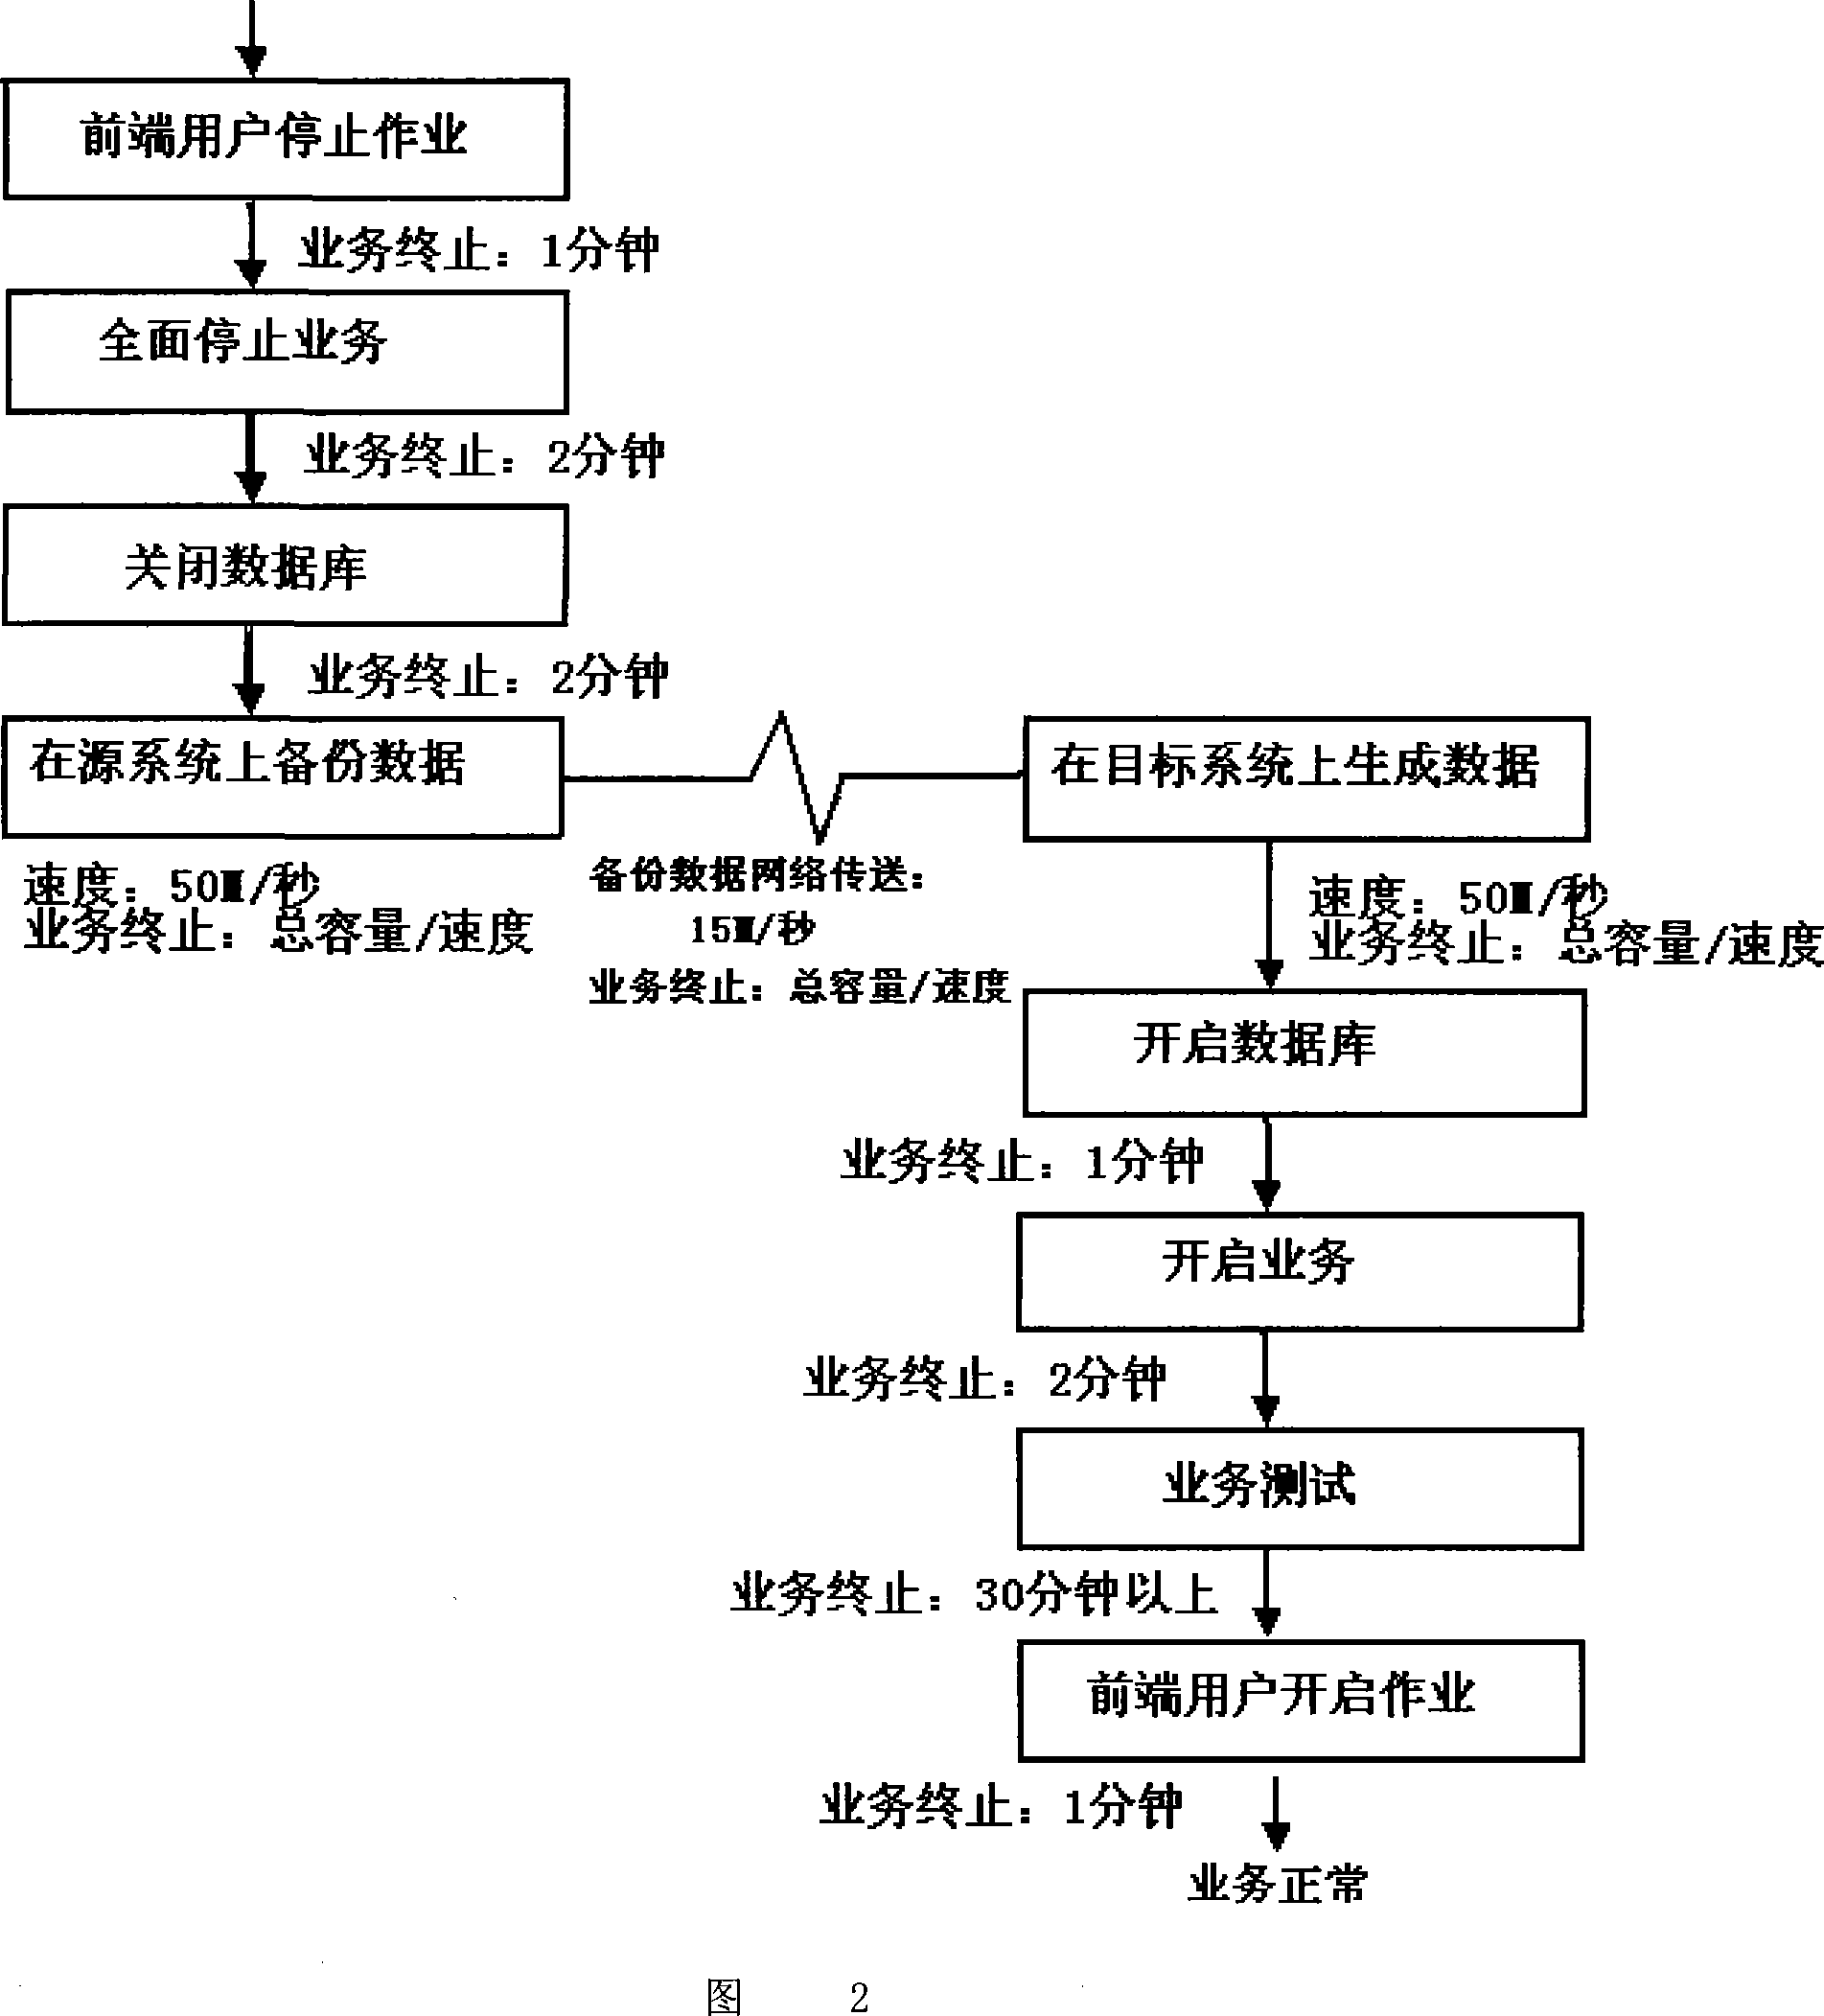 On-line switchover method for computer production system